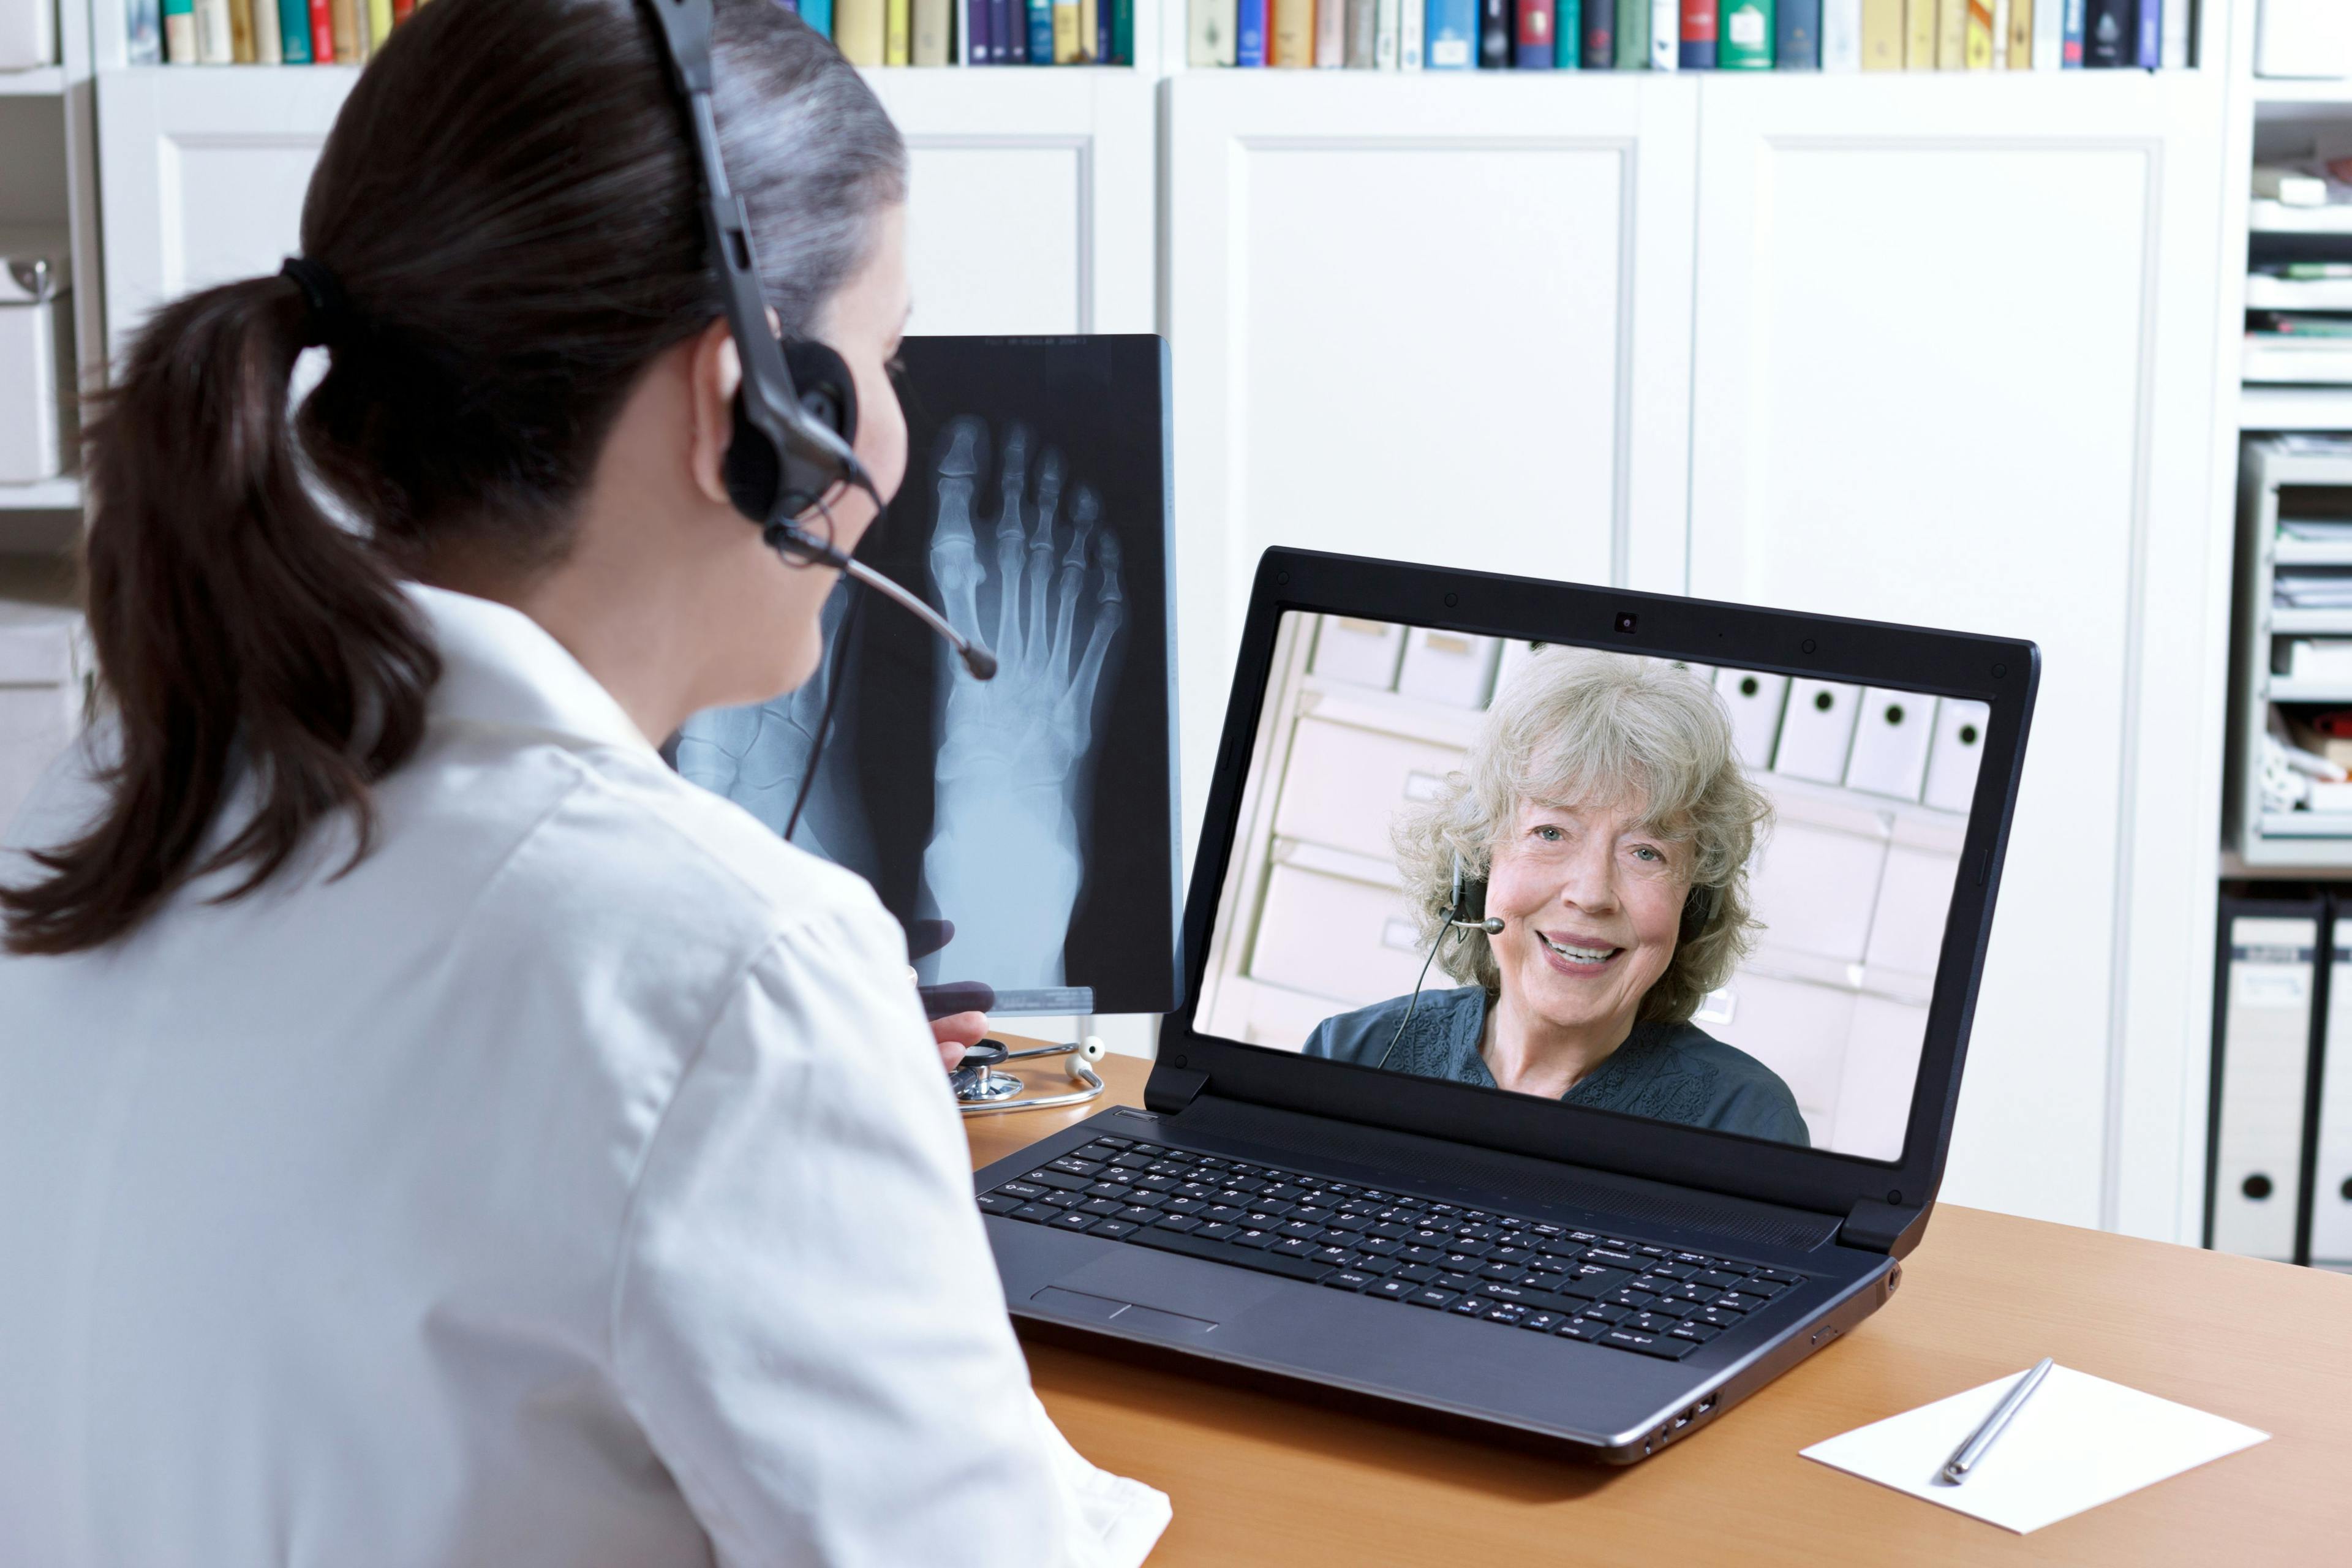 Transition to Telemedicine Practices May Have Streamlined Care in Cardiology Clinics